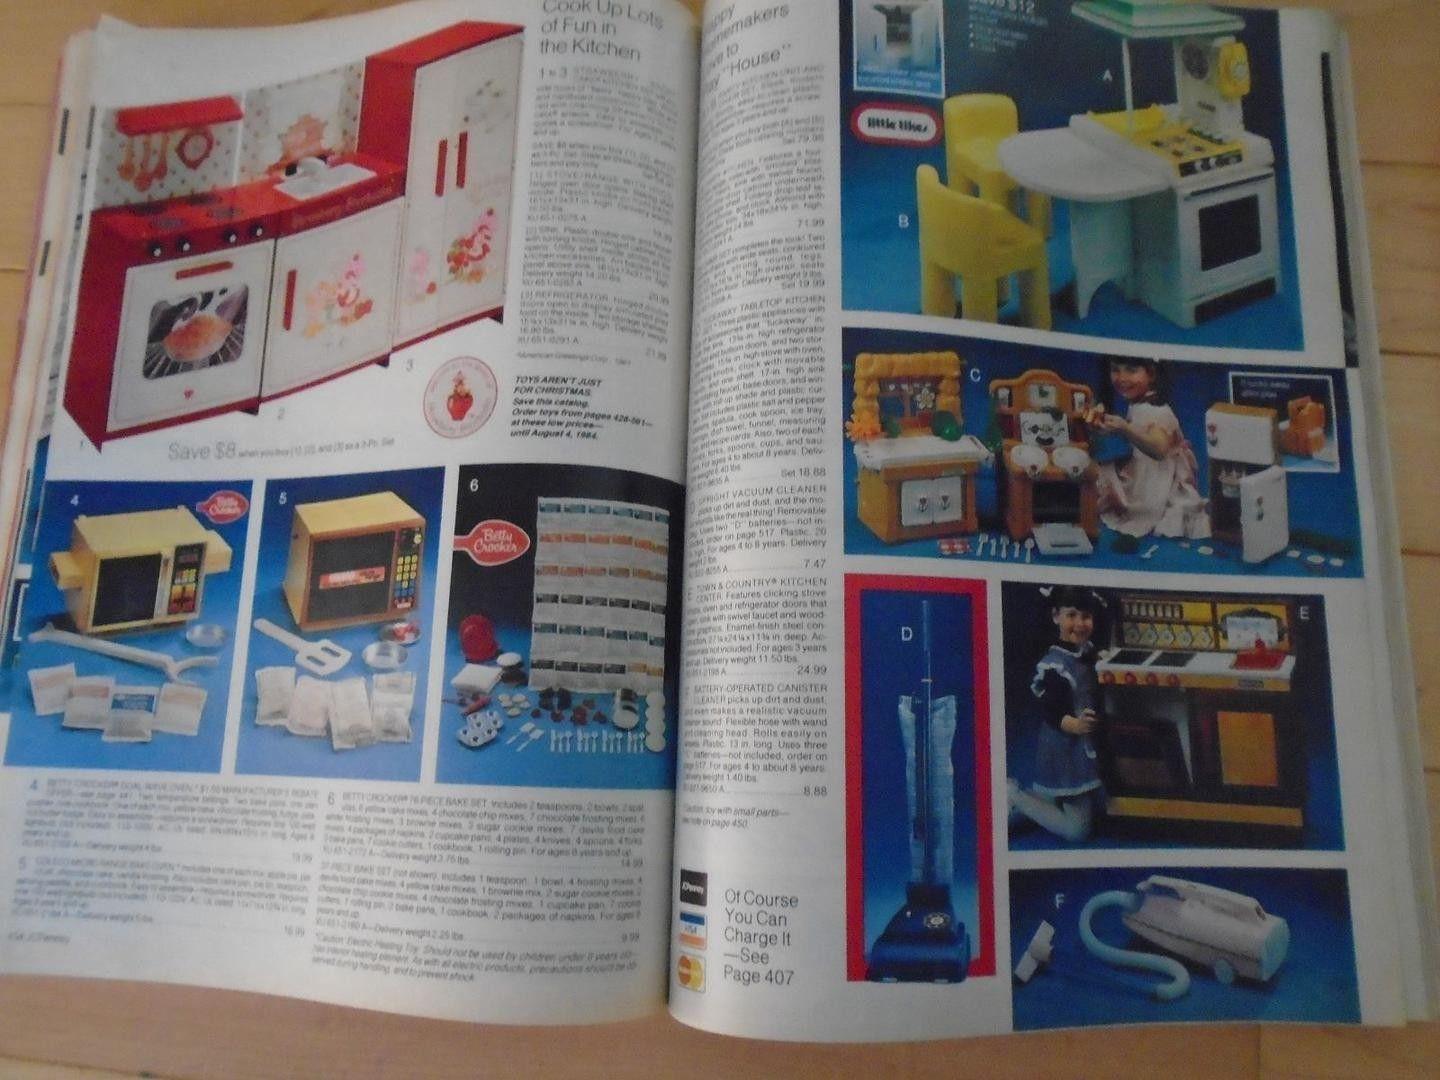 1985 JCPenney Logo - JCPenney Christmas Book Store Catalogs 1983 1985 Toy Reference Wish